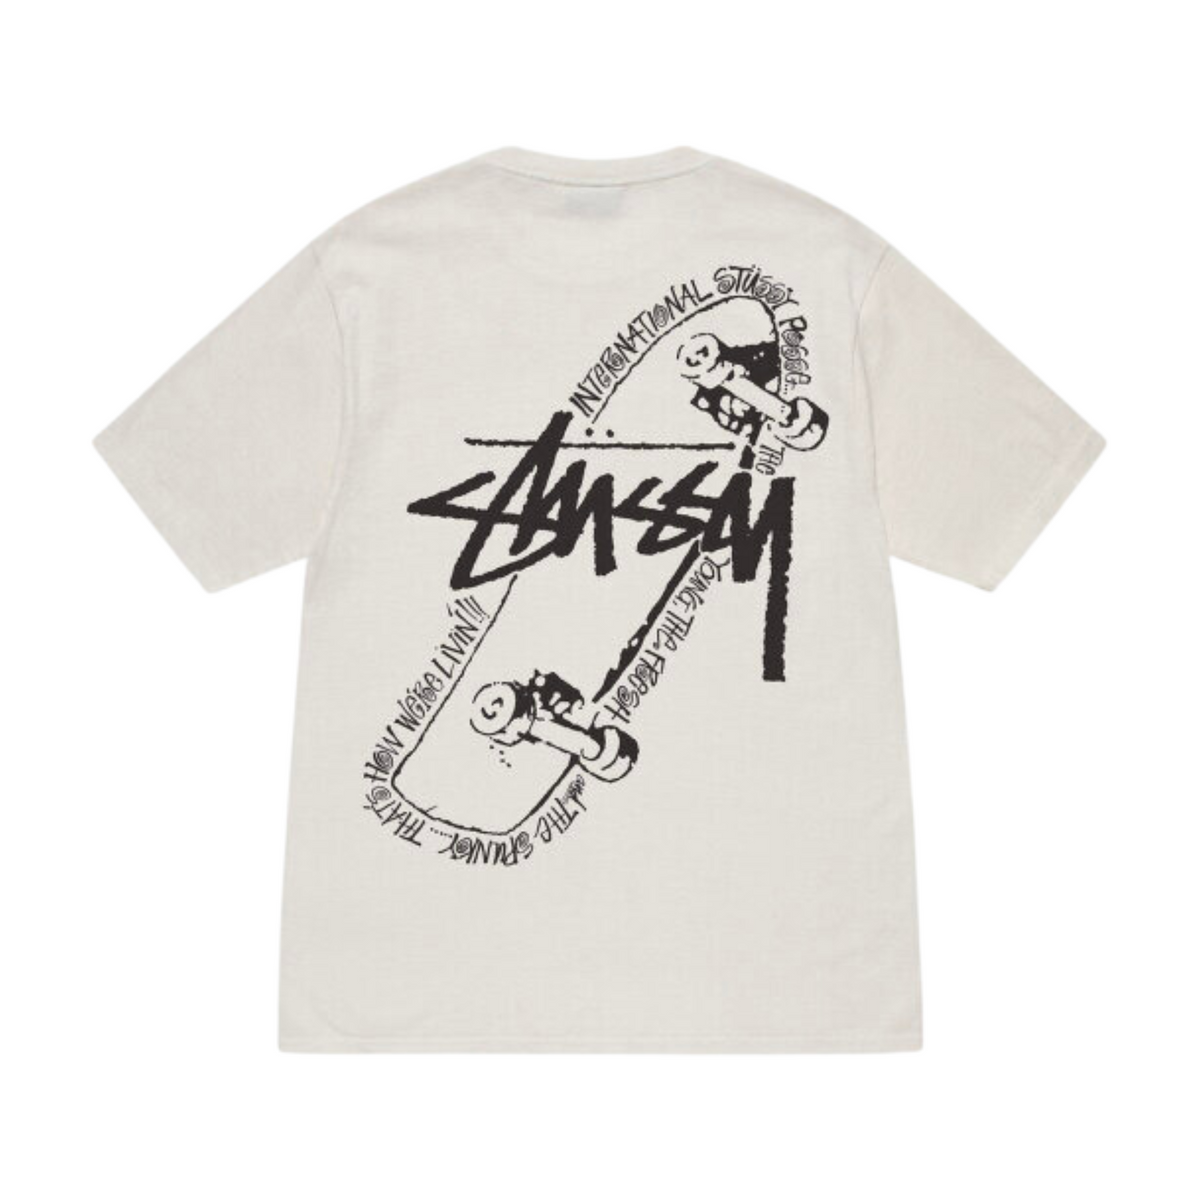 Stüssy Skate Posse Pigment Dyed Tee "Natural"